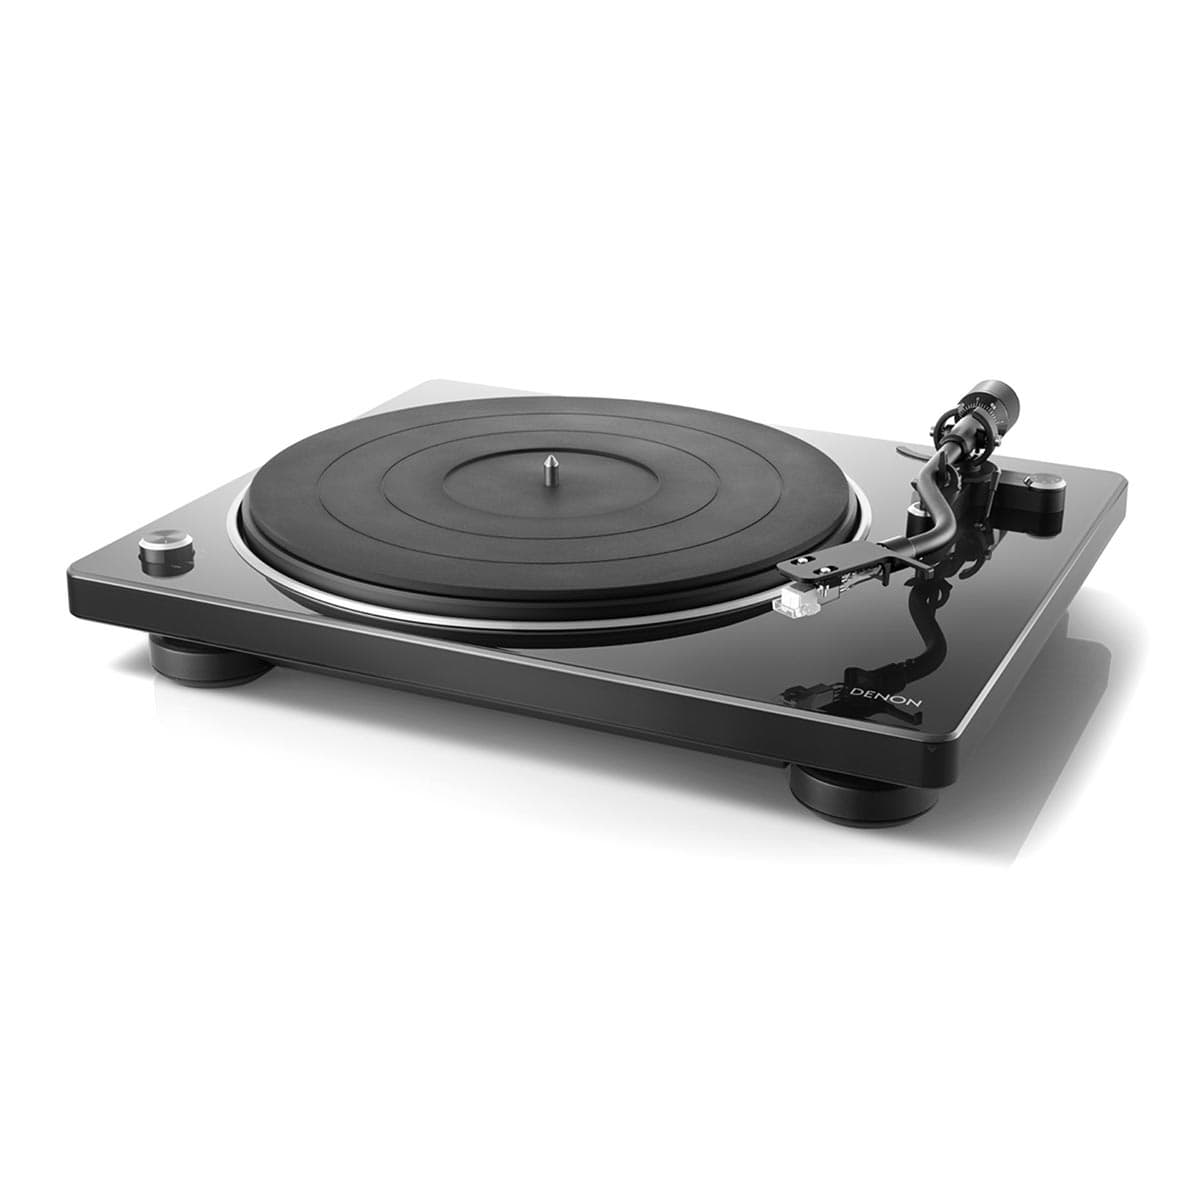 Denon Denon DP-400 Manual Turntable with Phono Preamp Turntables